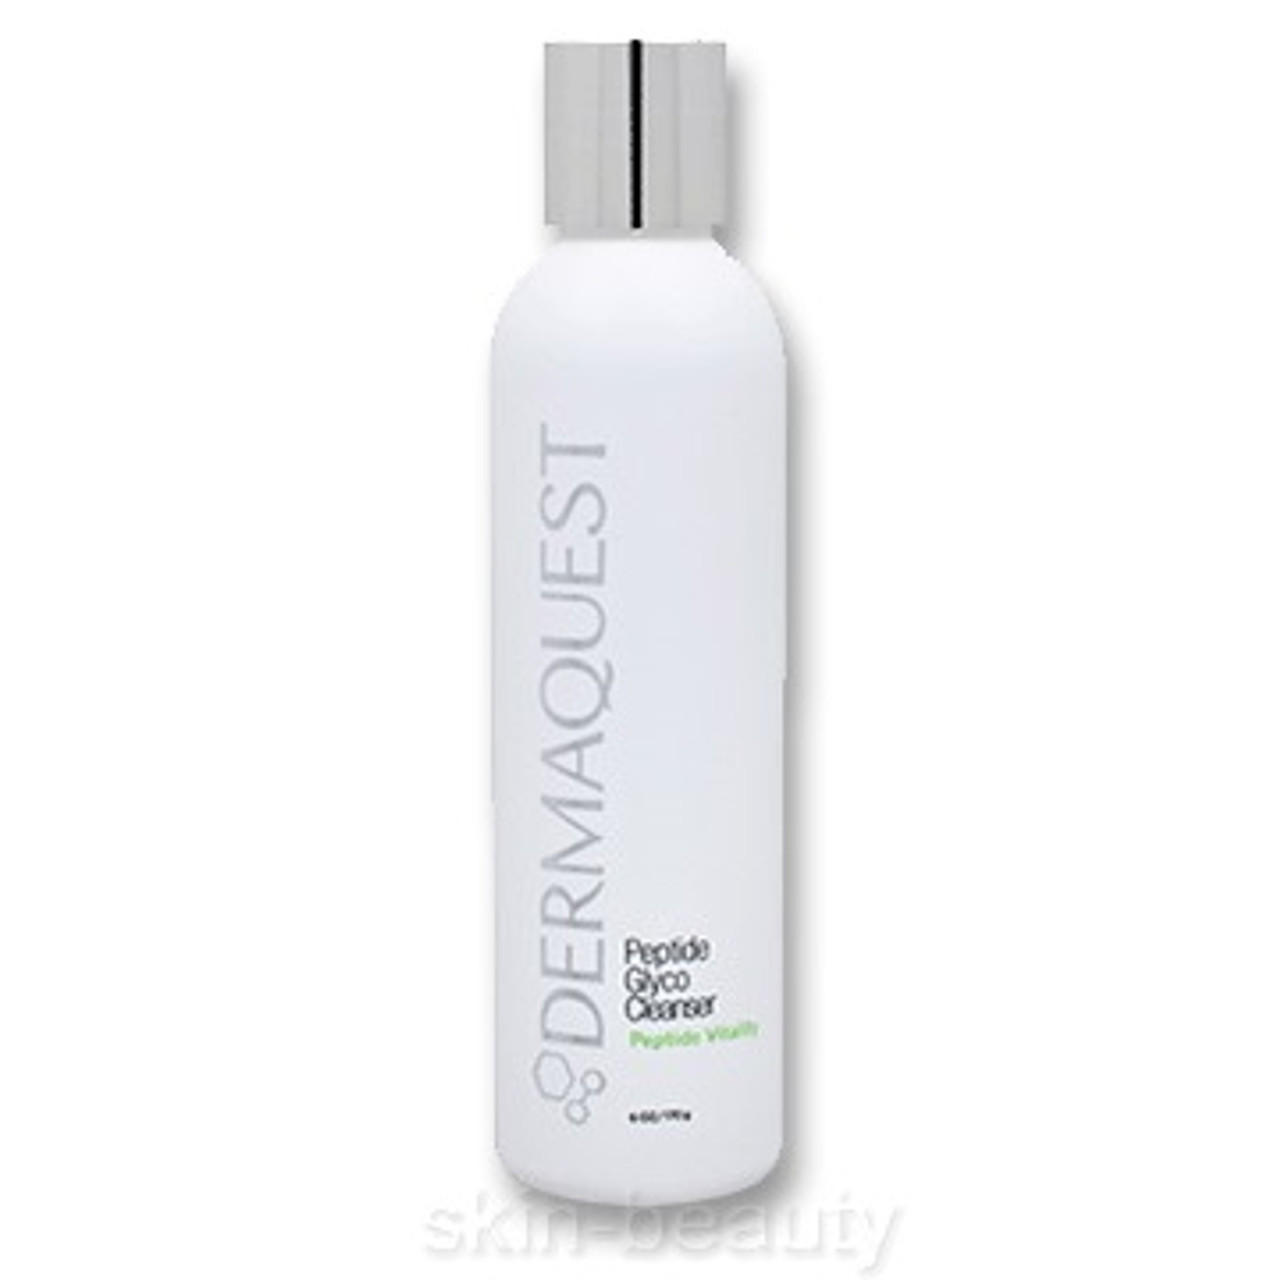 DermaQuest Peptide Glyco Cleanser - 6 oz - Free with $132 Purchase